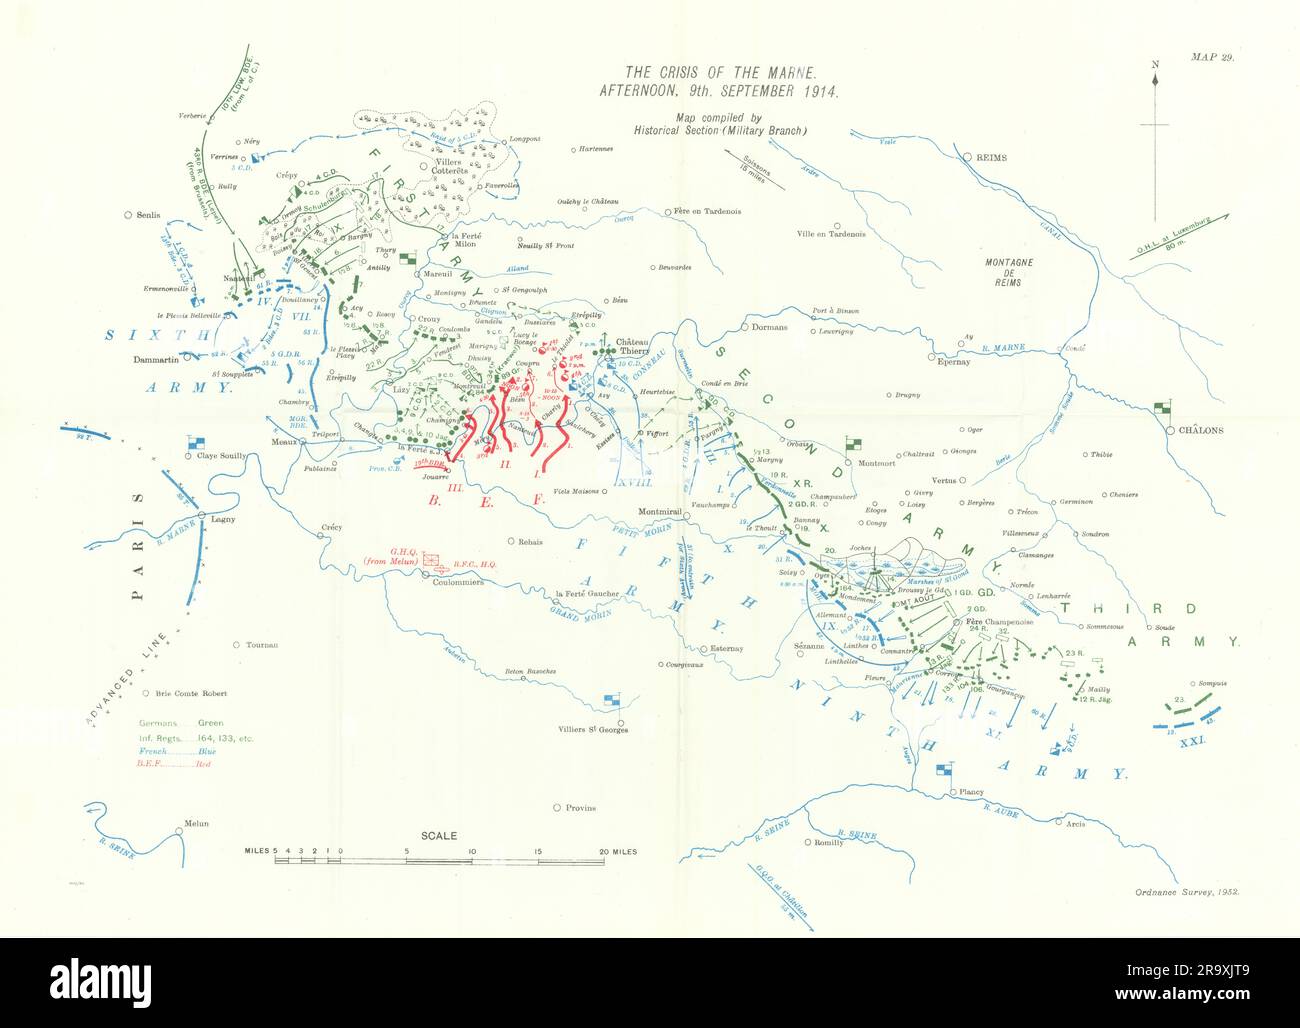 Crisis of Marne. Afternoon, 9th September 1914. Battle of Marne. WW1. 1933 map Stock Photo